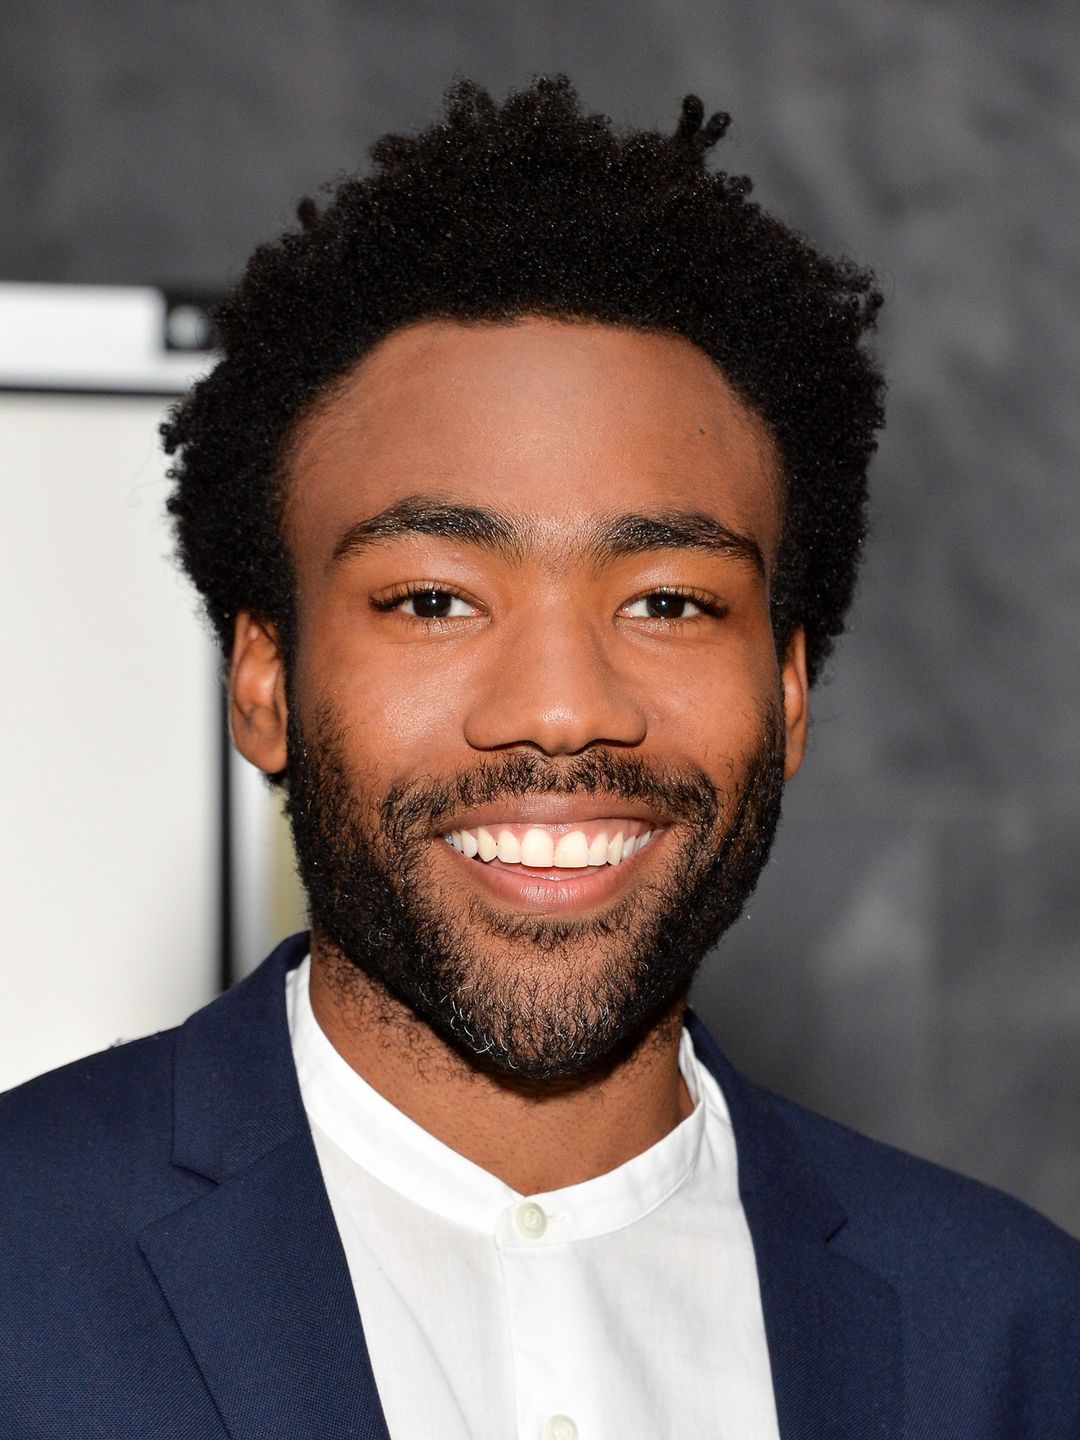 Donald Glover story of success